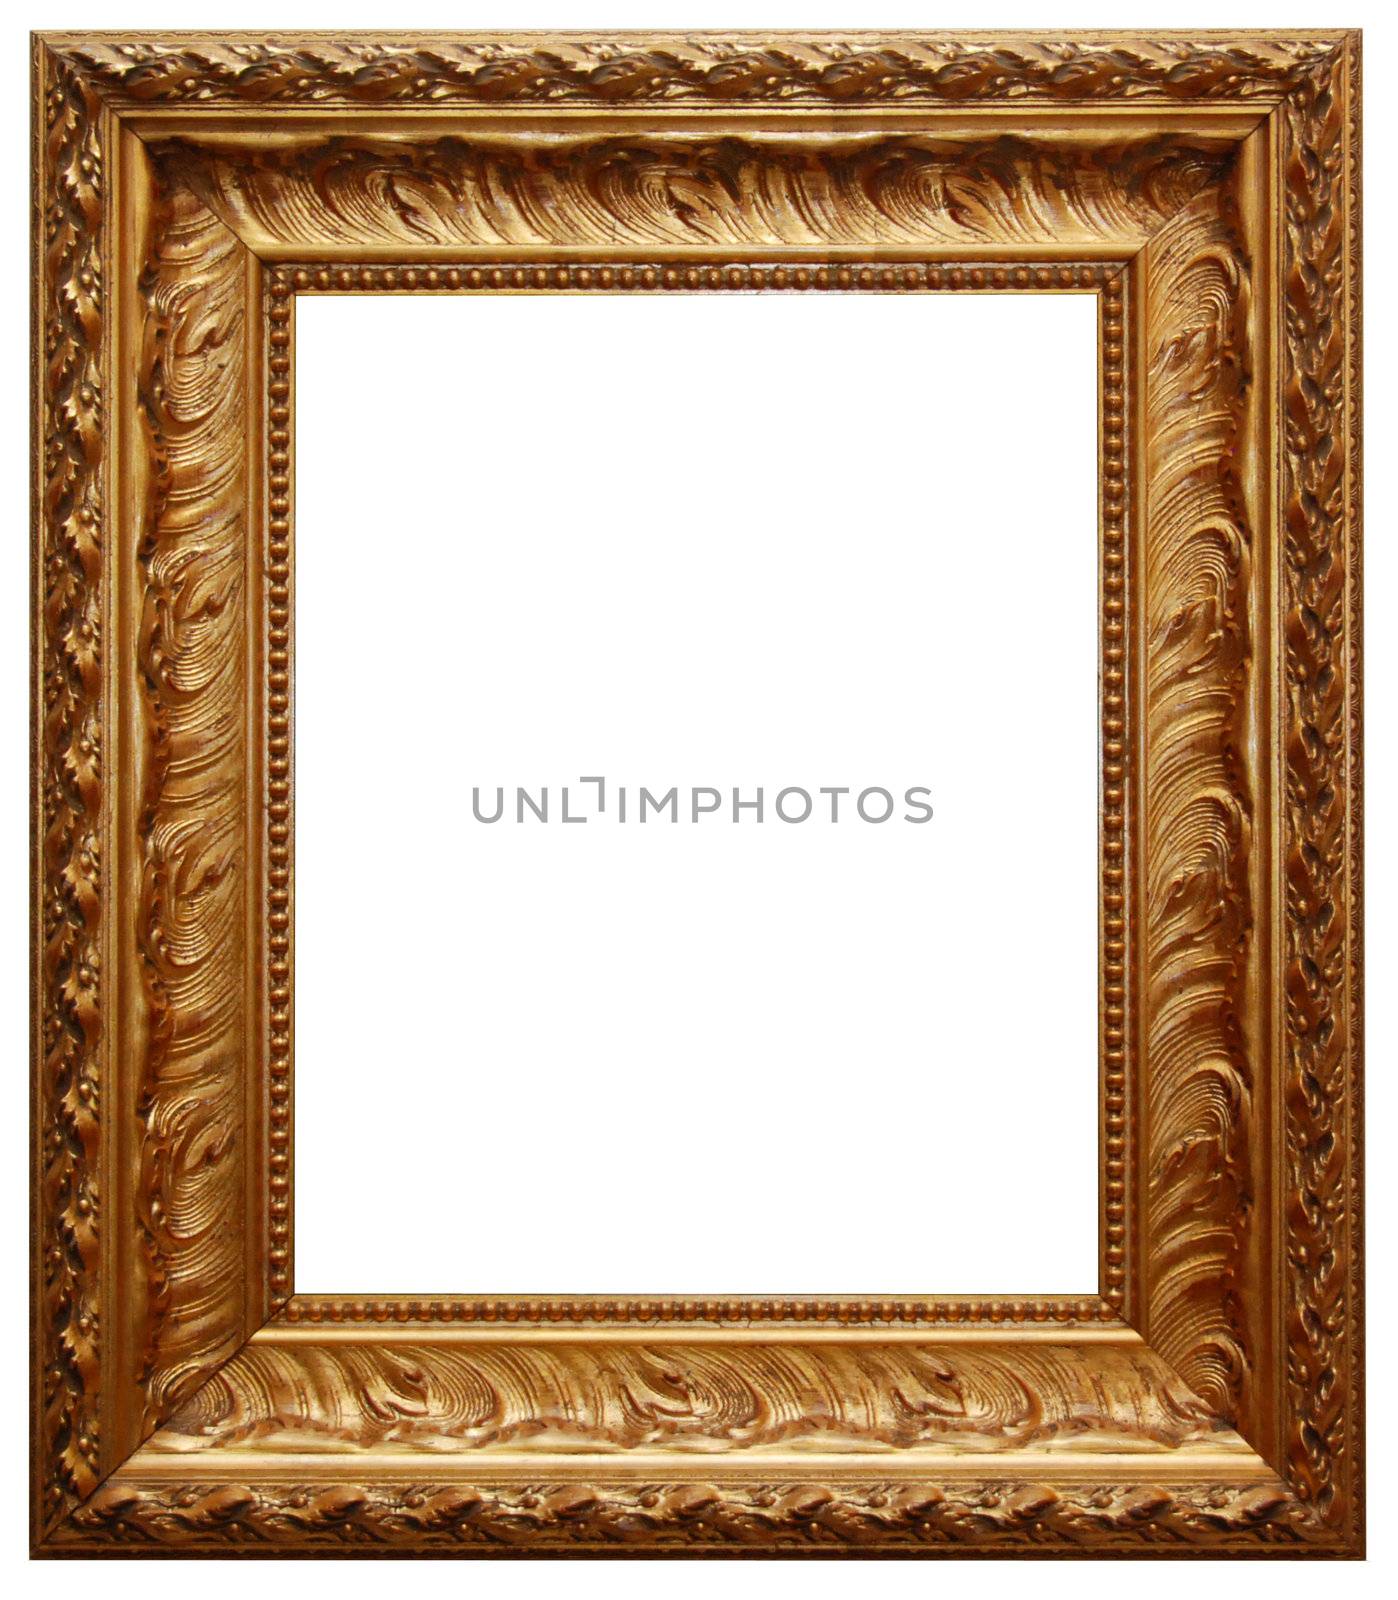 Classic gold ornate frame isolated on white background